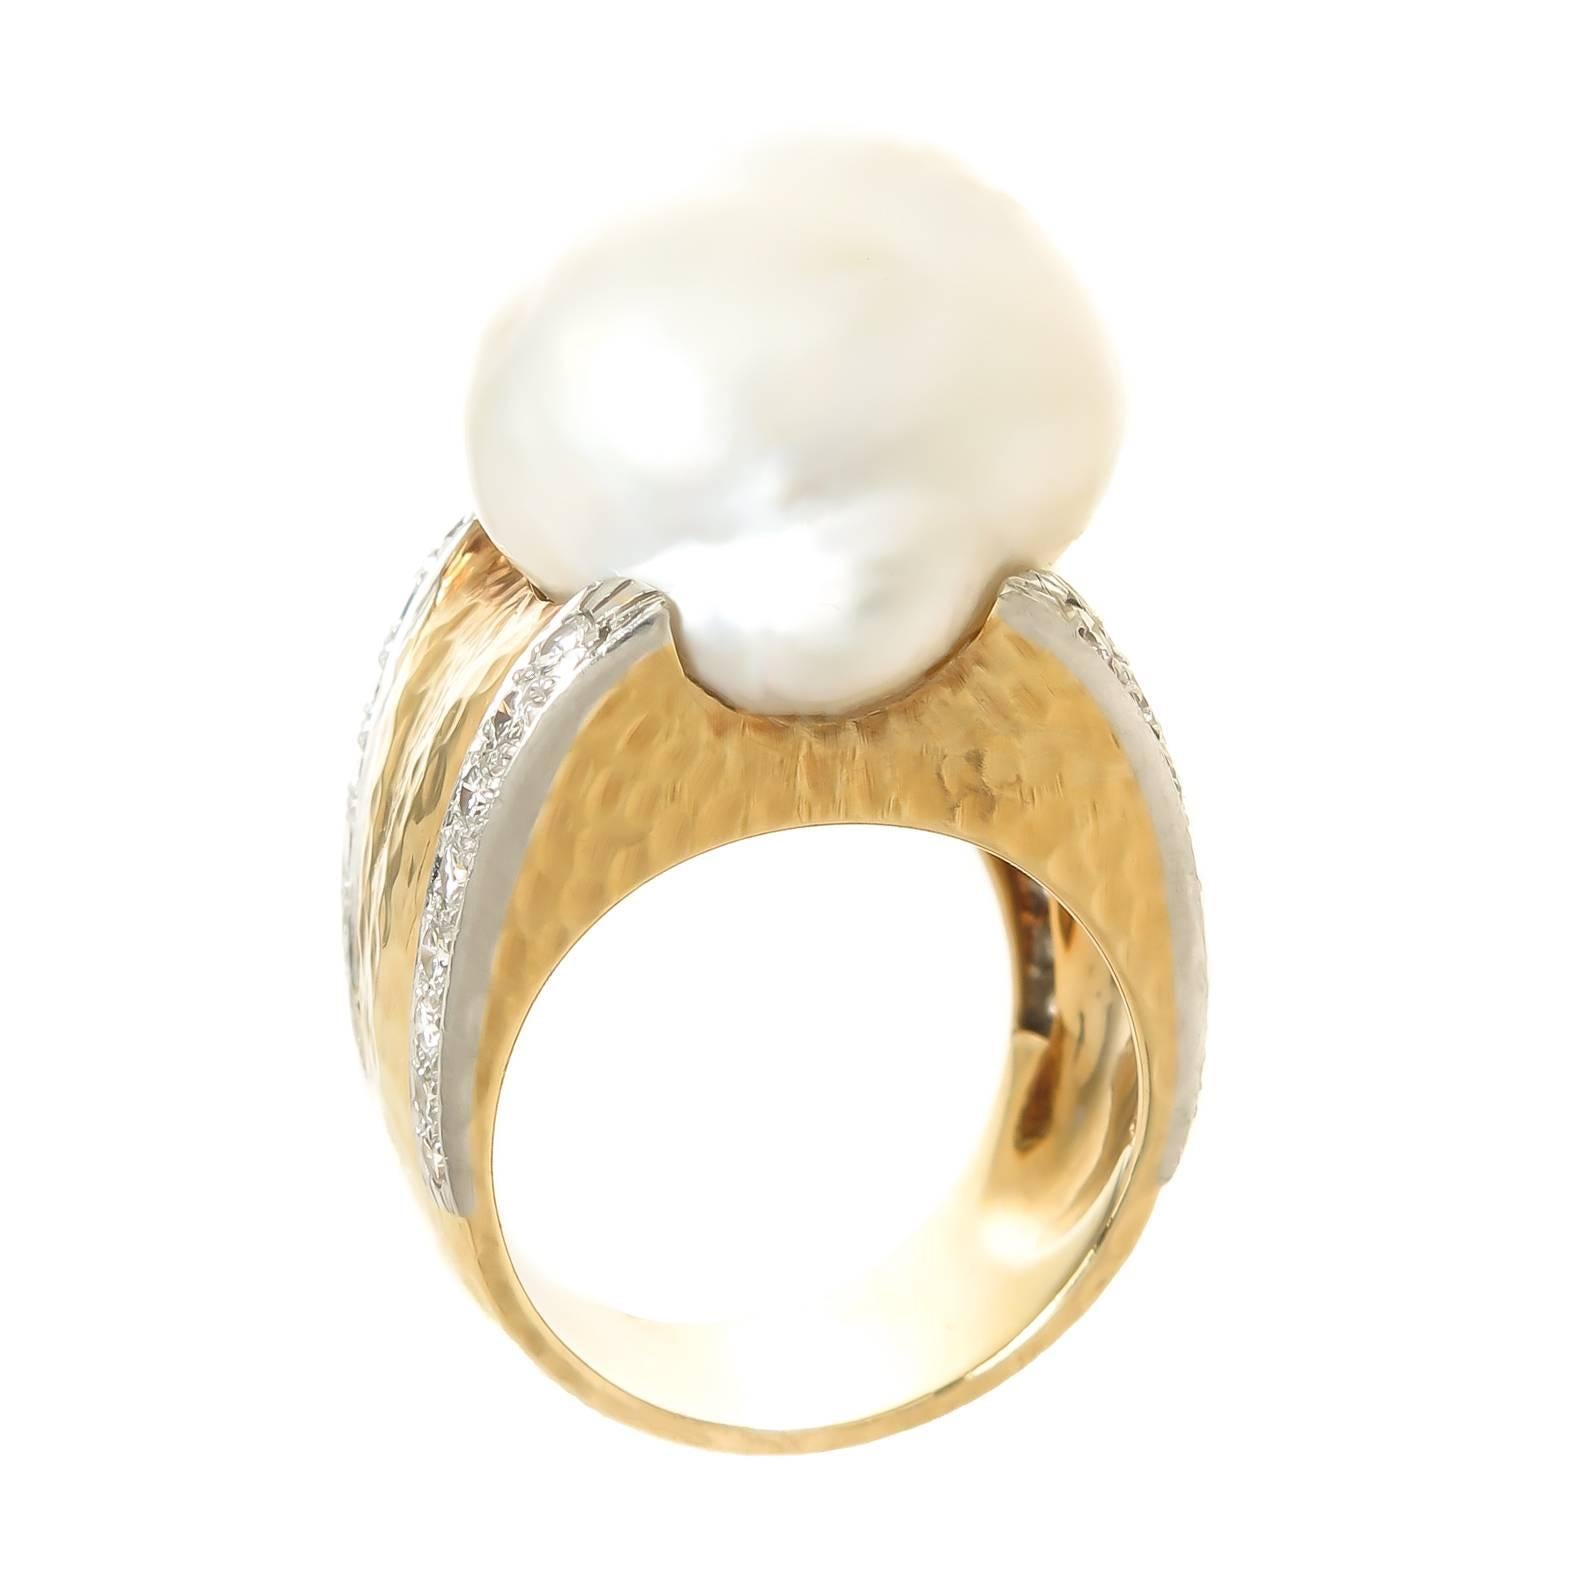 Circa 1990 David Webb 18K Yellow Gold and Large Pearl ring, centrally set with a Natural fresh Water Pearl measuring 21 X 17 X 12 M. M.  Further set with 32 Round Brilliant cut Diamonds totaling approximately 1 Carat, the ring has a hand Hammered